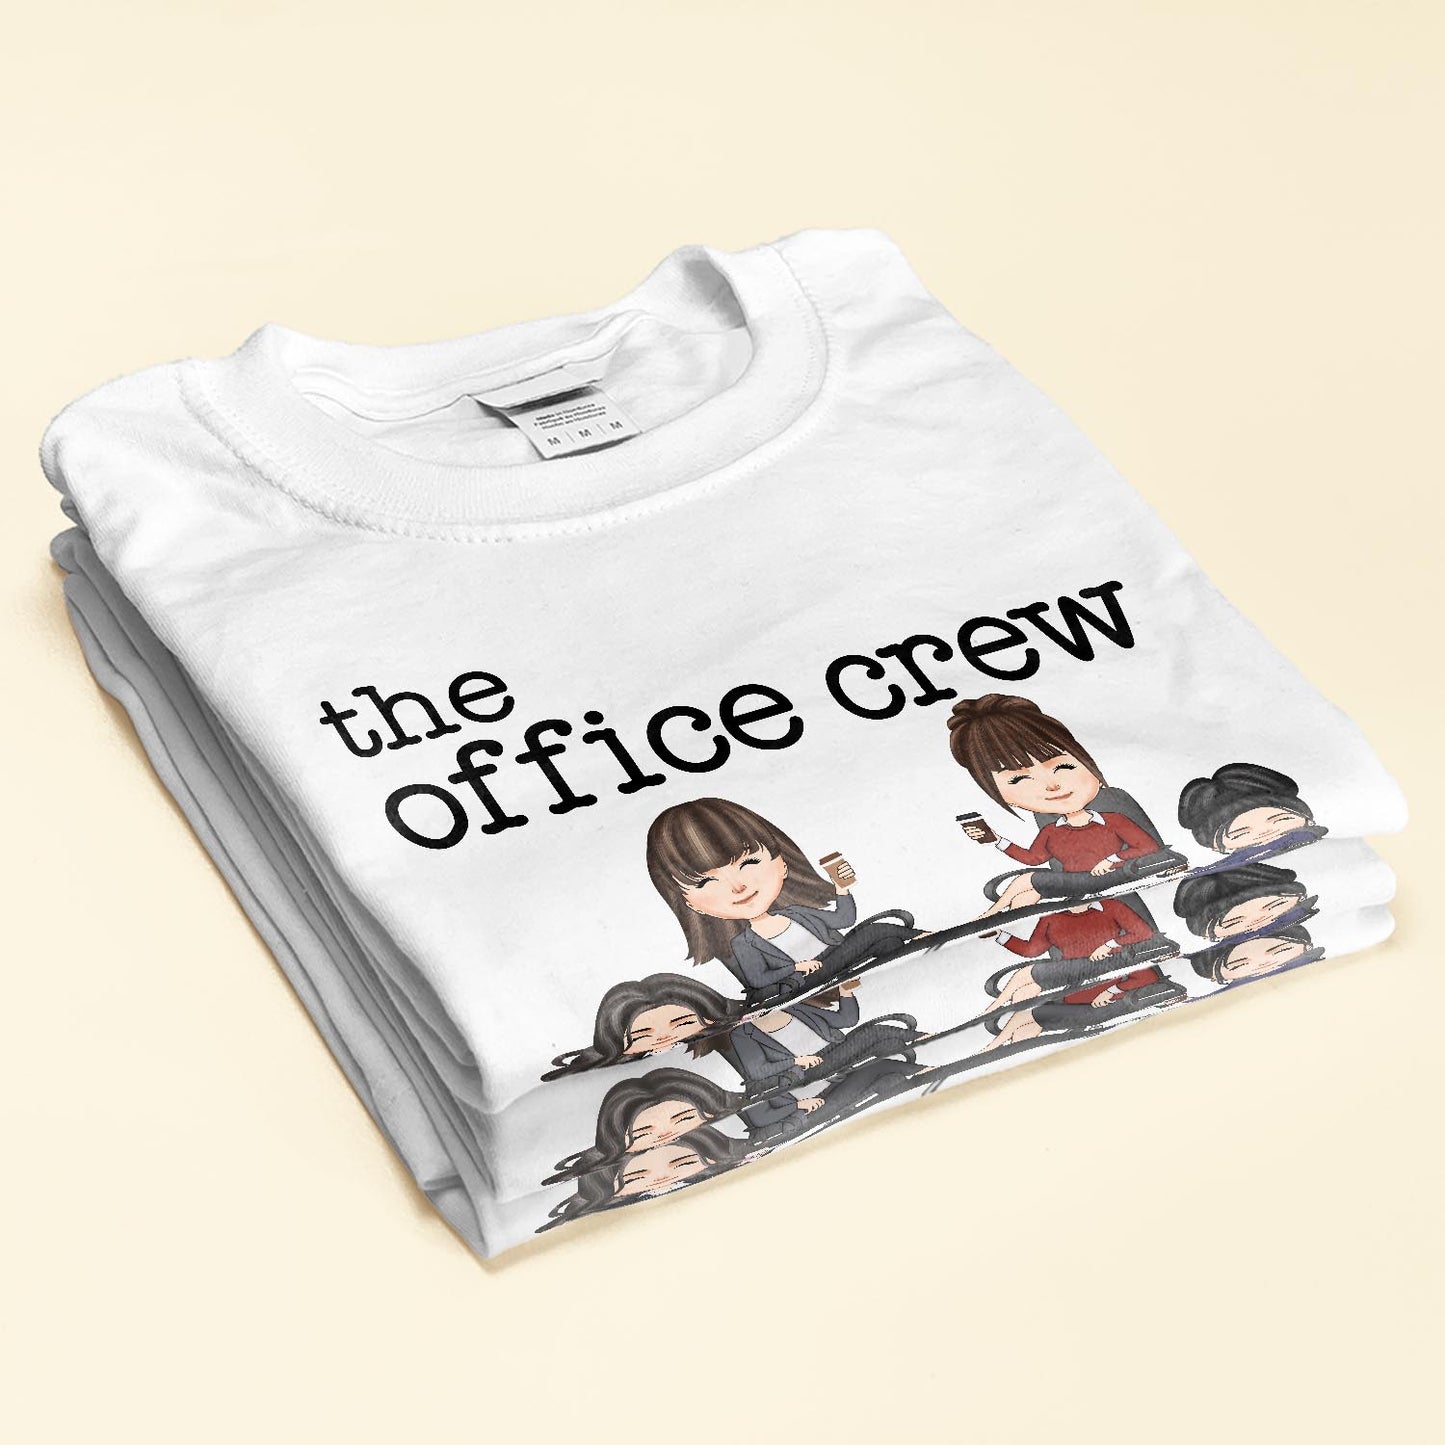 The Office Crew  - Personalized Shirt - Birthday Gift For Colleagues, Employees, Office Squad